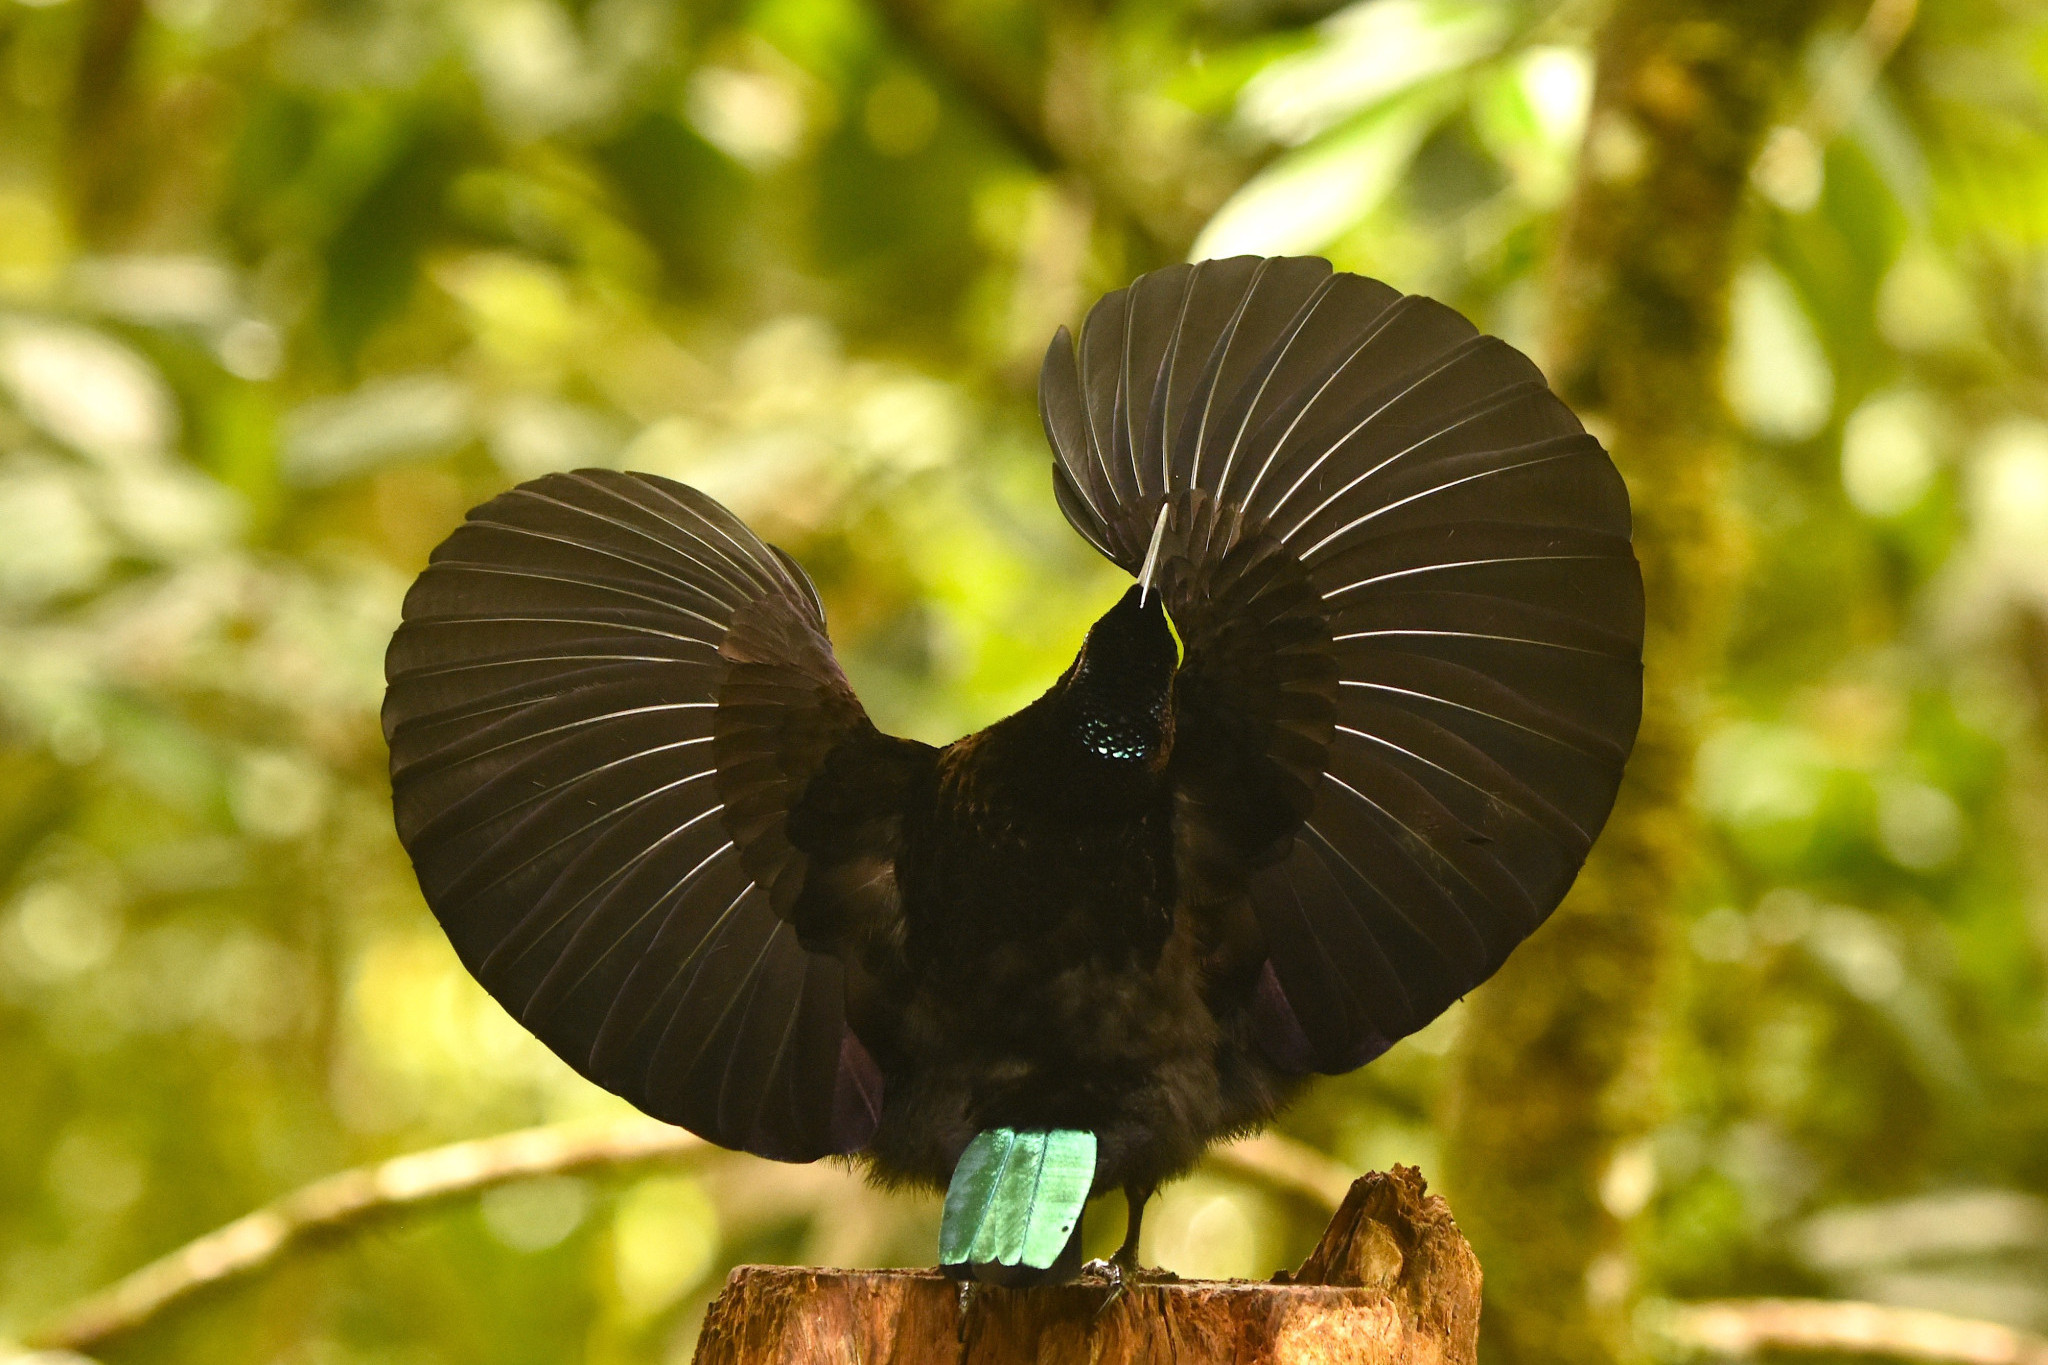 Discover the display and dancing of Victoria’s Riflebird - feature photo